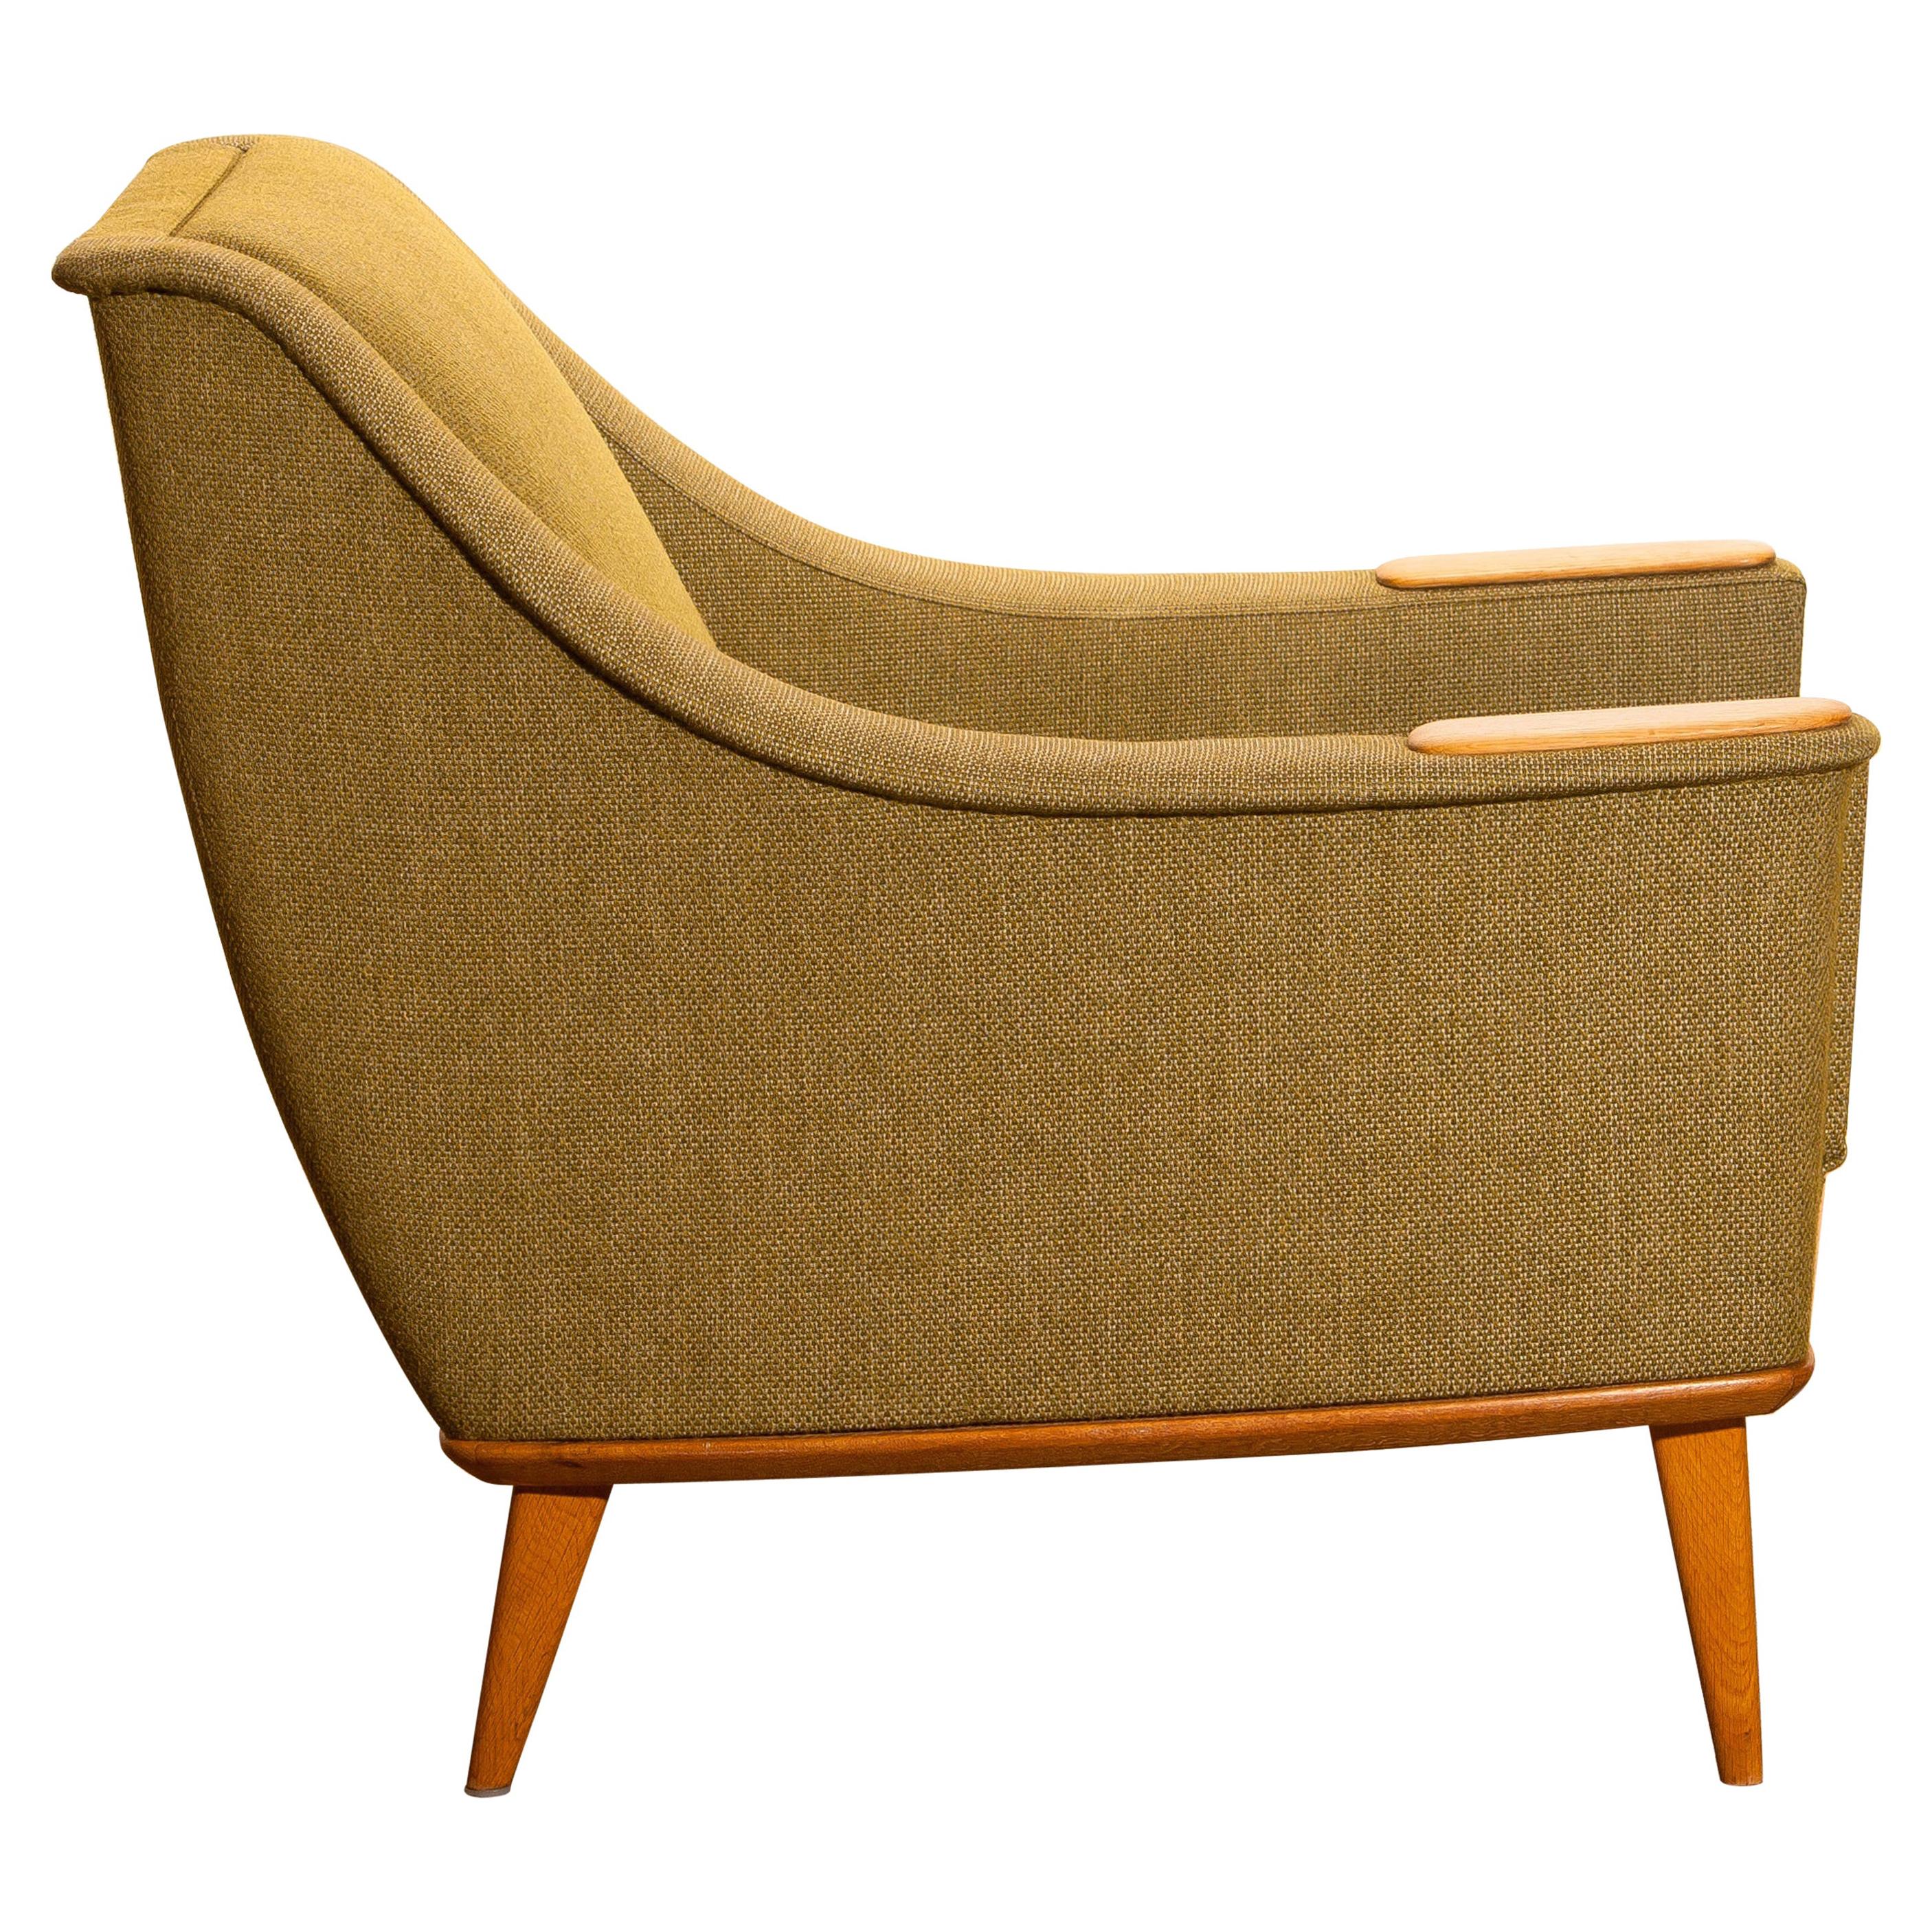 Beautiful and original midcentury lounge or easy chair with oak details by Folke Ohlsson for DUX, Sweden.
This chair sits extremely comfortable and is in good condition.

Period: 1960.
The dimensions are: Depth 77 cm, 30 inch, wide 77 cm, 30